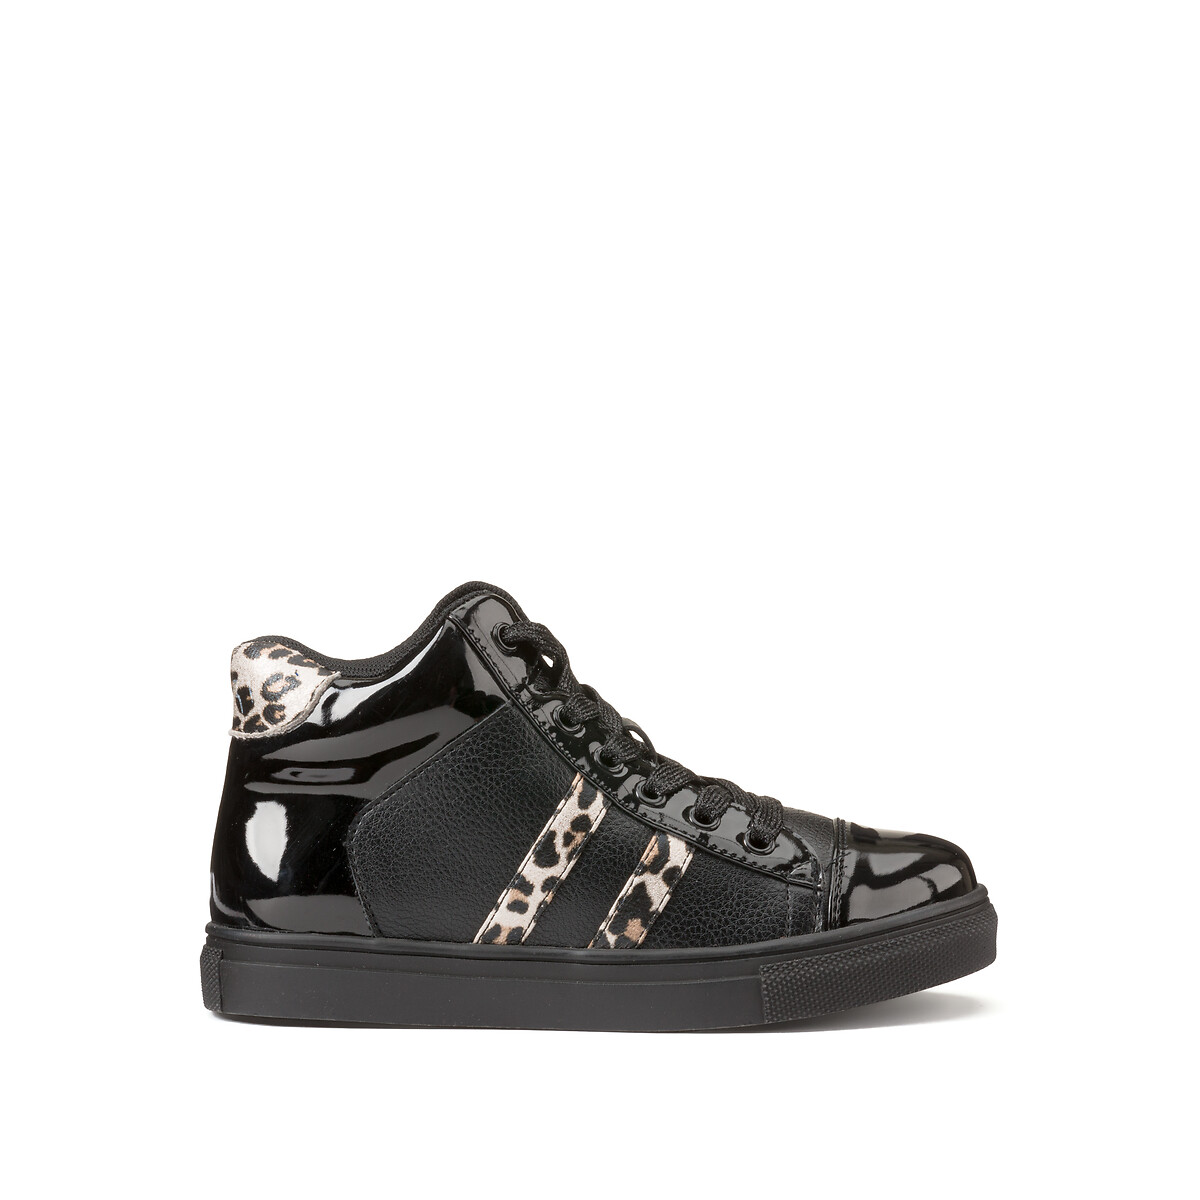 Kids High Top Trainers with Leopard Print Details